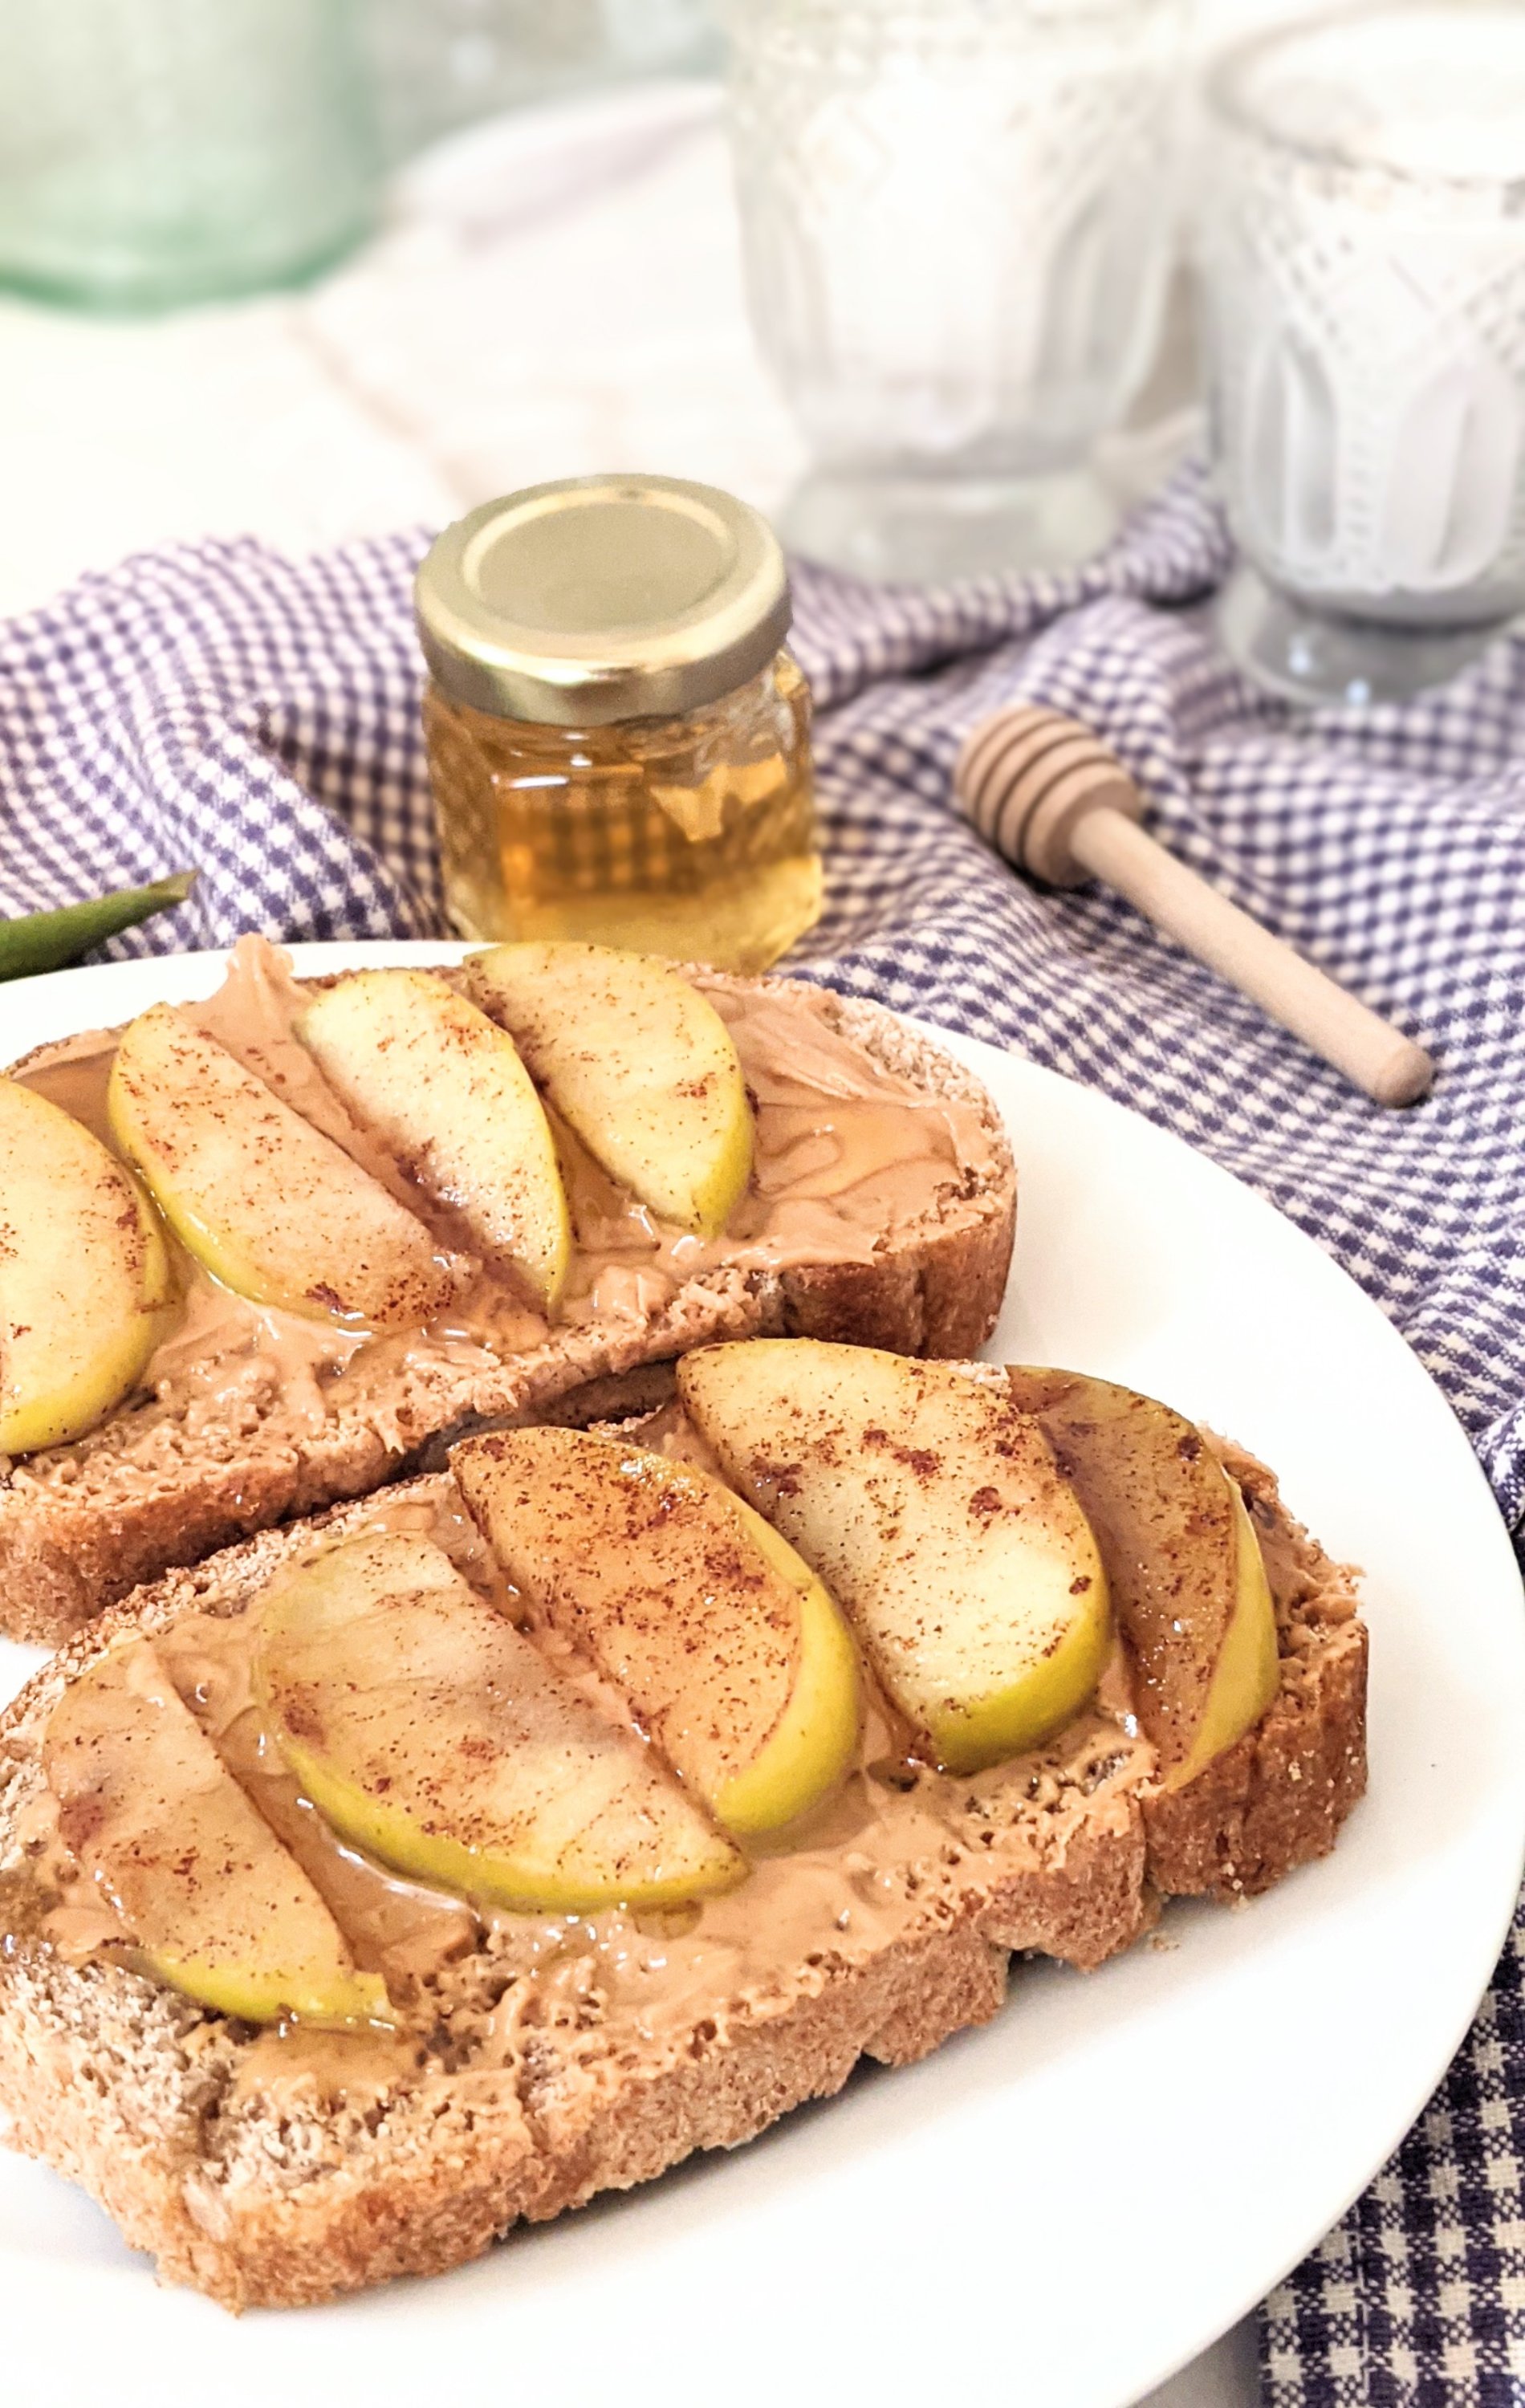 apple toast vegetarian toast recipes with honey apple toasts recipe fancy lazy brunch recipes impressive and lazy recipes for breakfast and guests entertaining recipes for brunch with honey